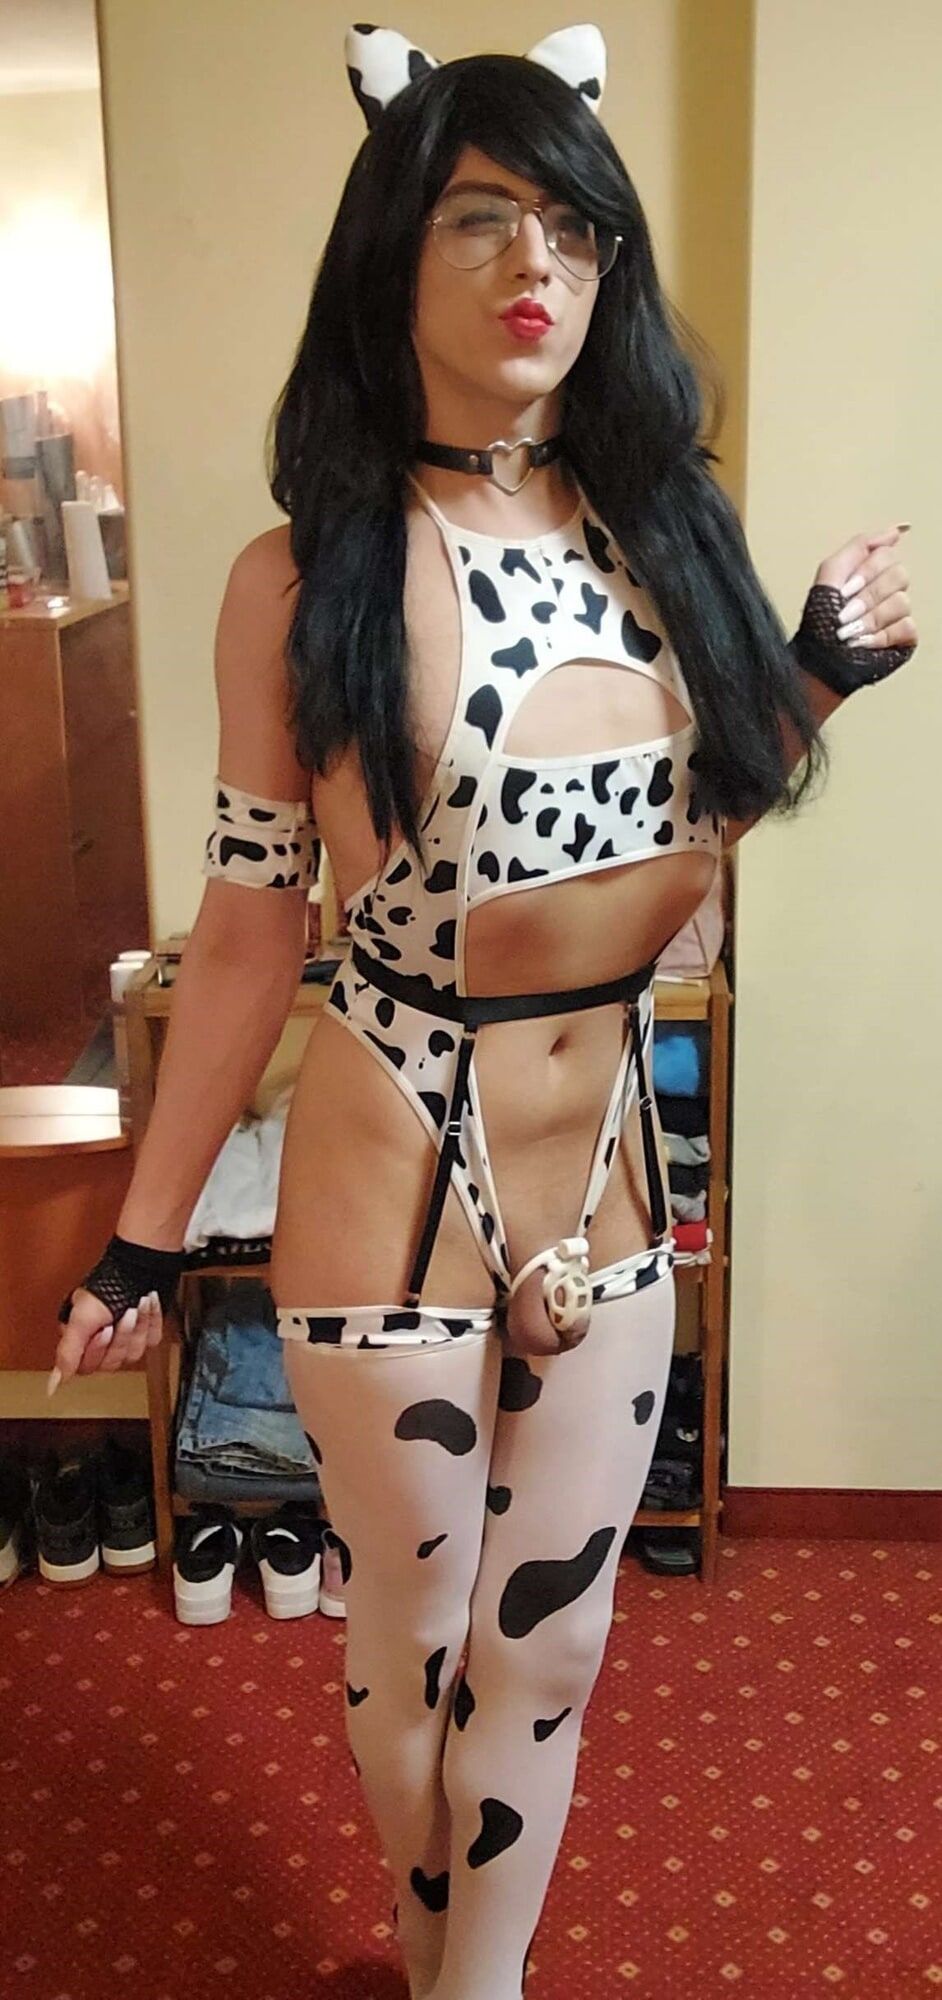 Me in My Cow Outfit #4